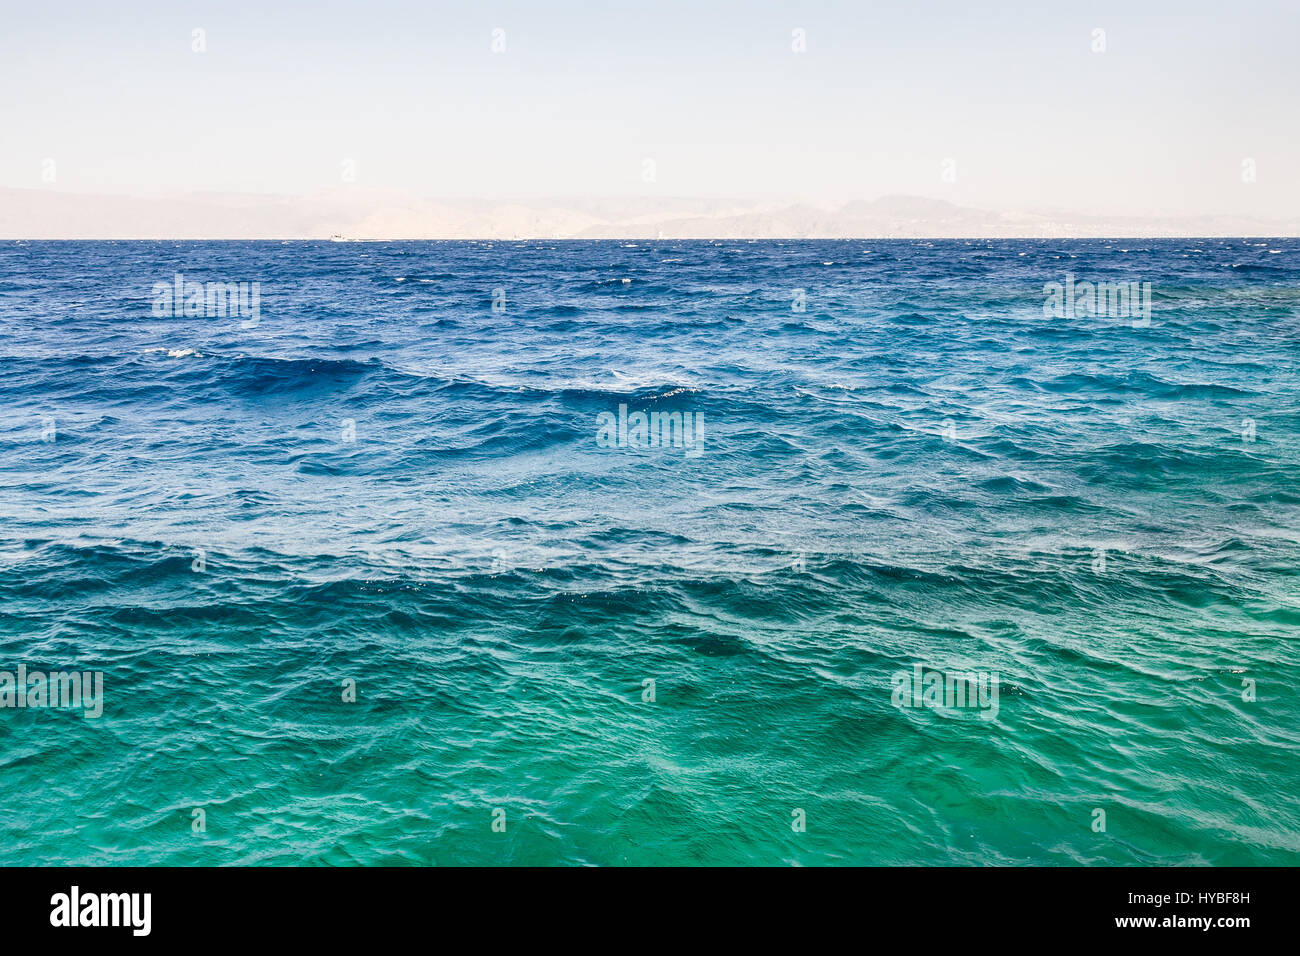 Travel to Middle East country Kingdom of Jordan - water surface of Gulf of Aqaba on Red Sea in winter morning Stock Photo